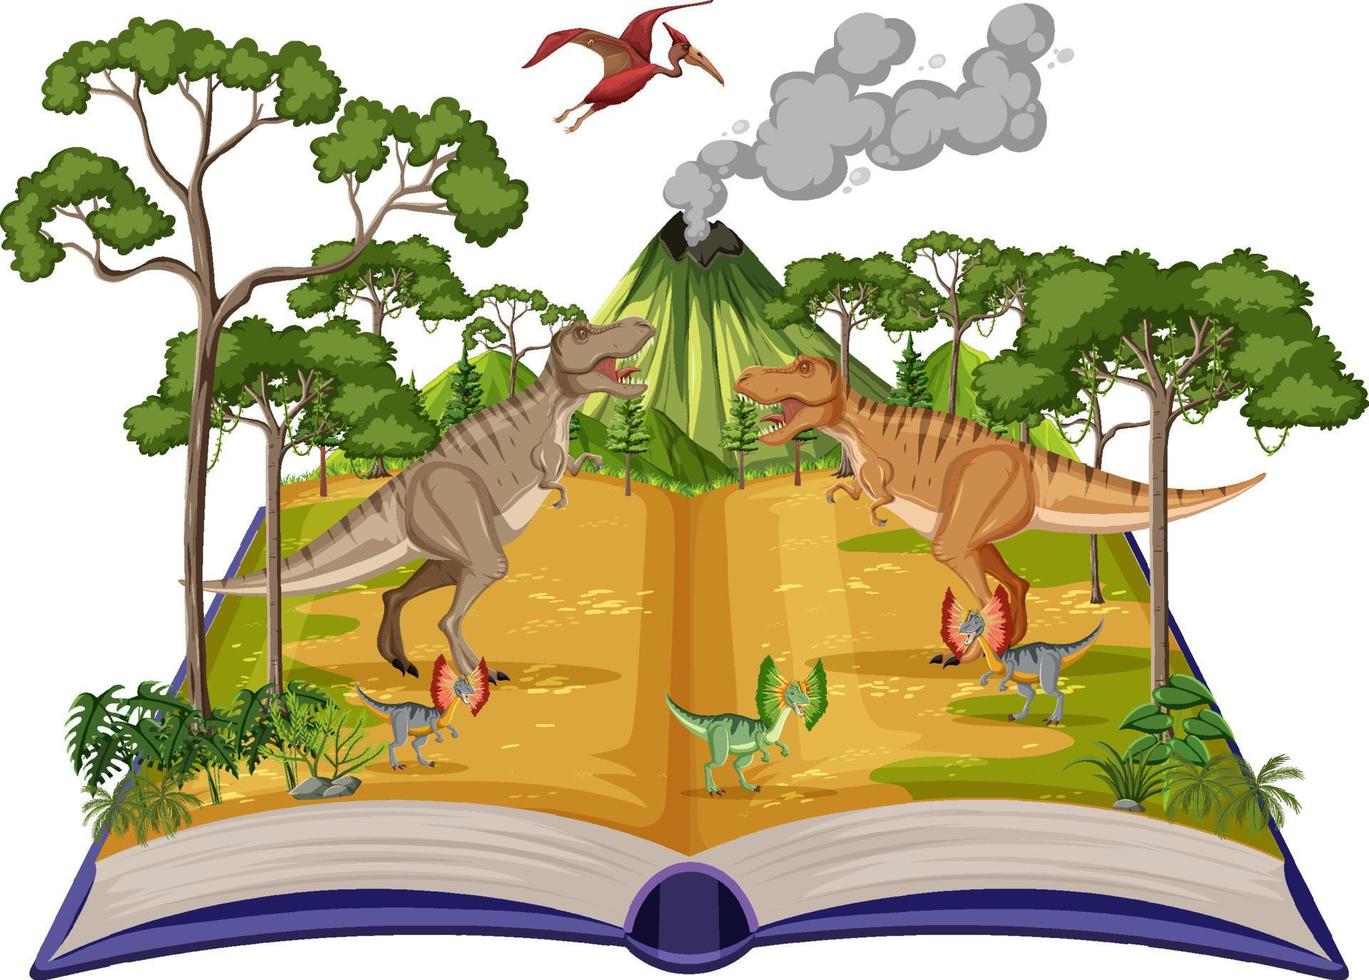 Book with scene of dinosaurs in forest vector